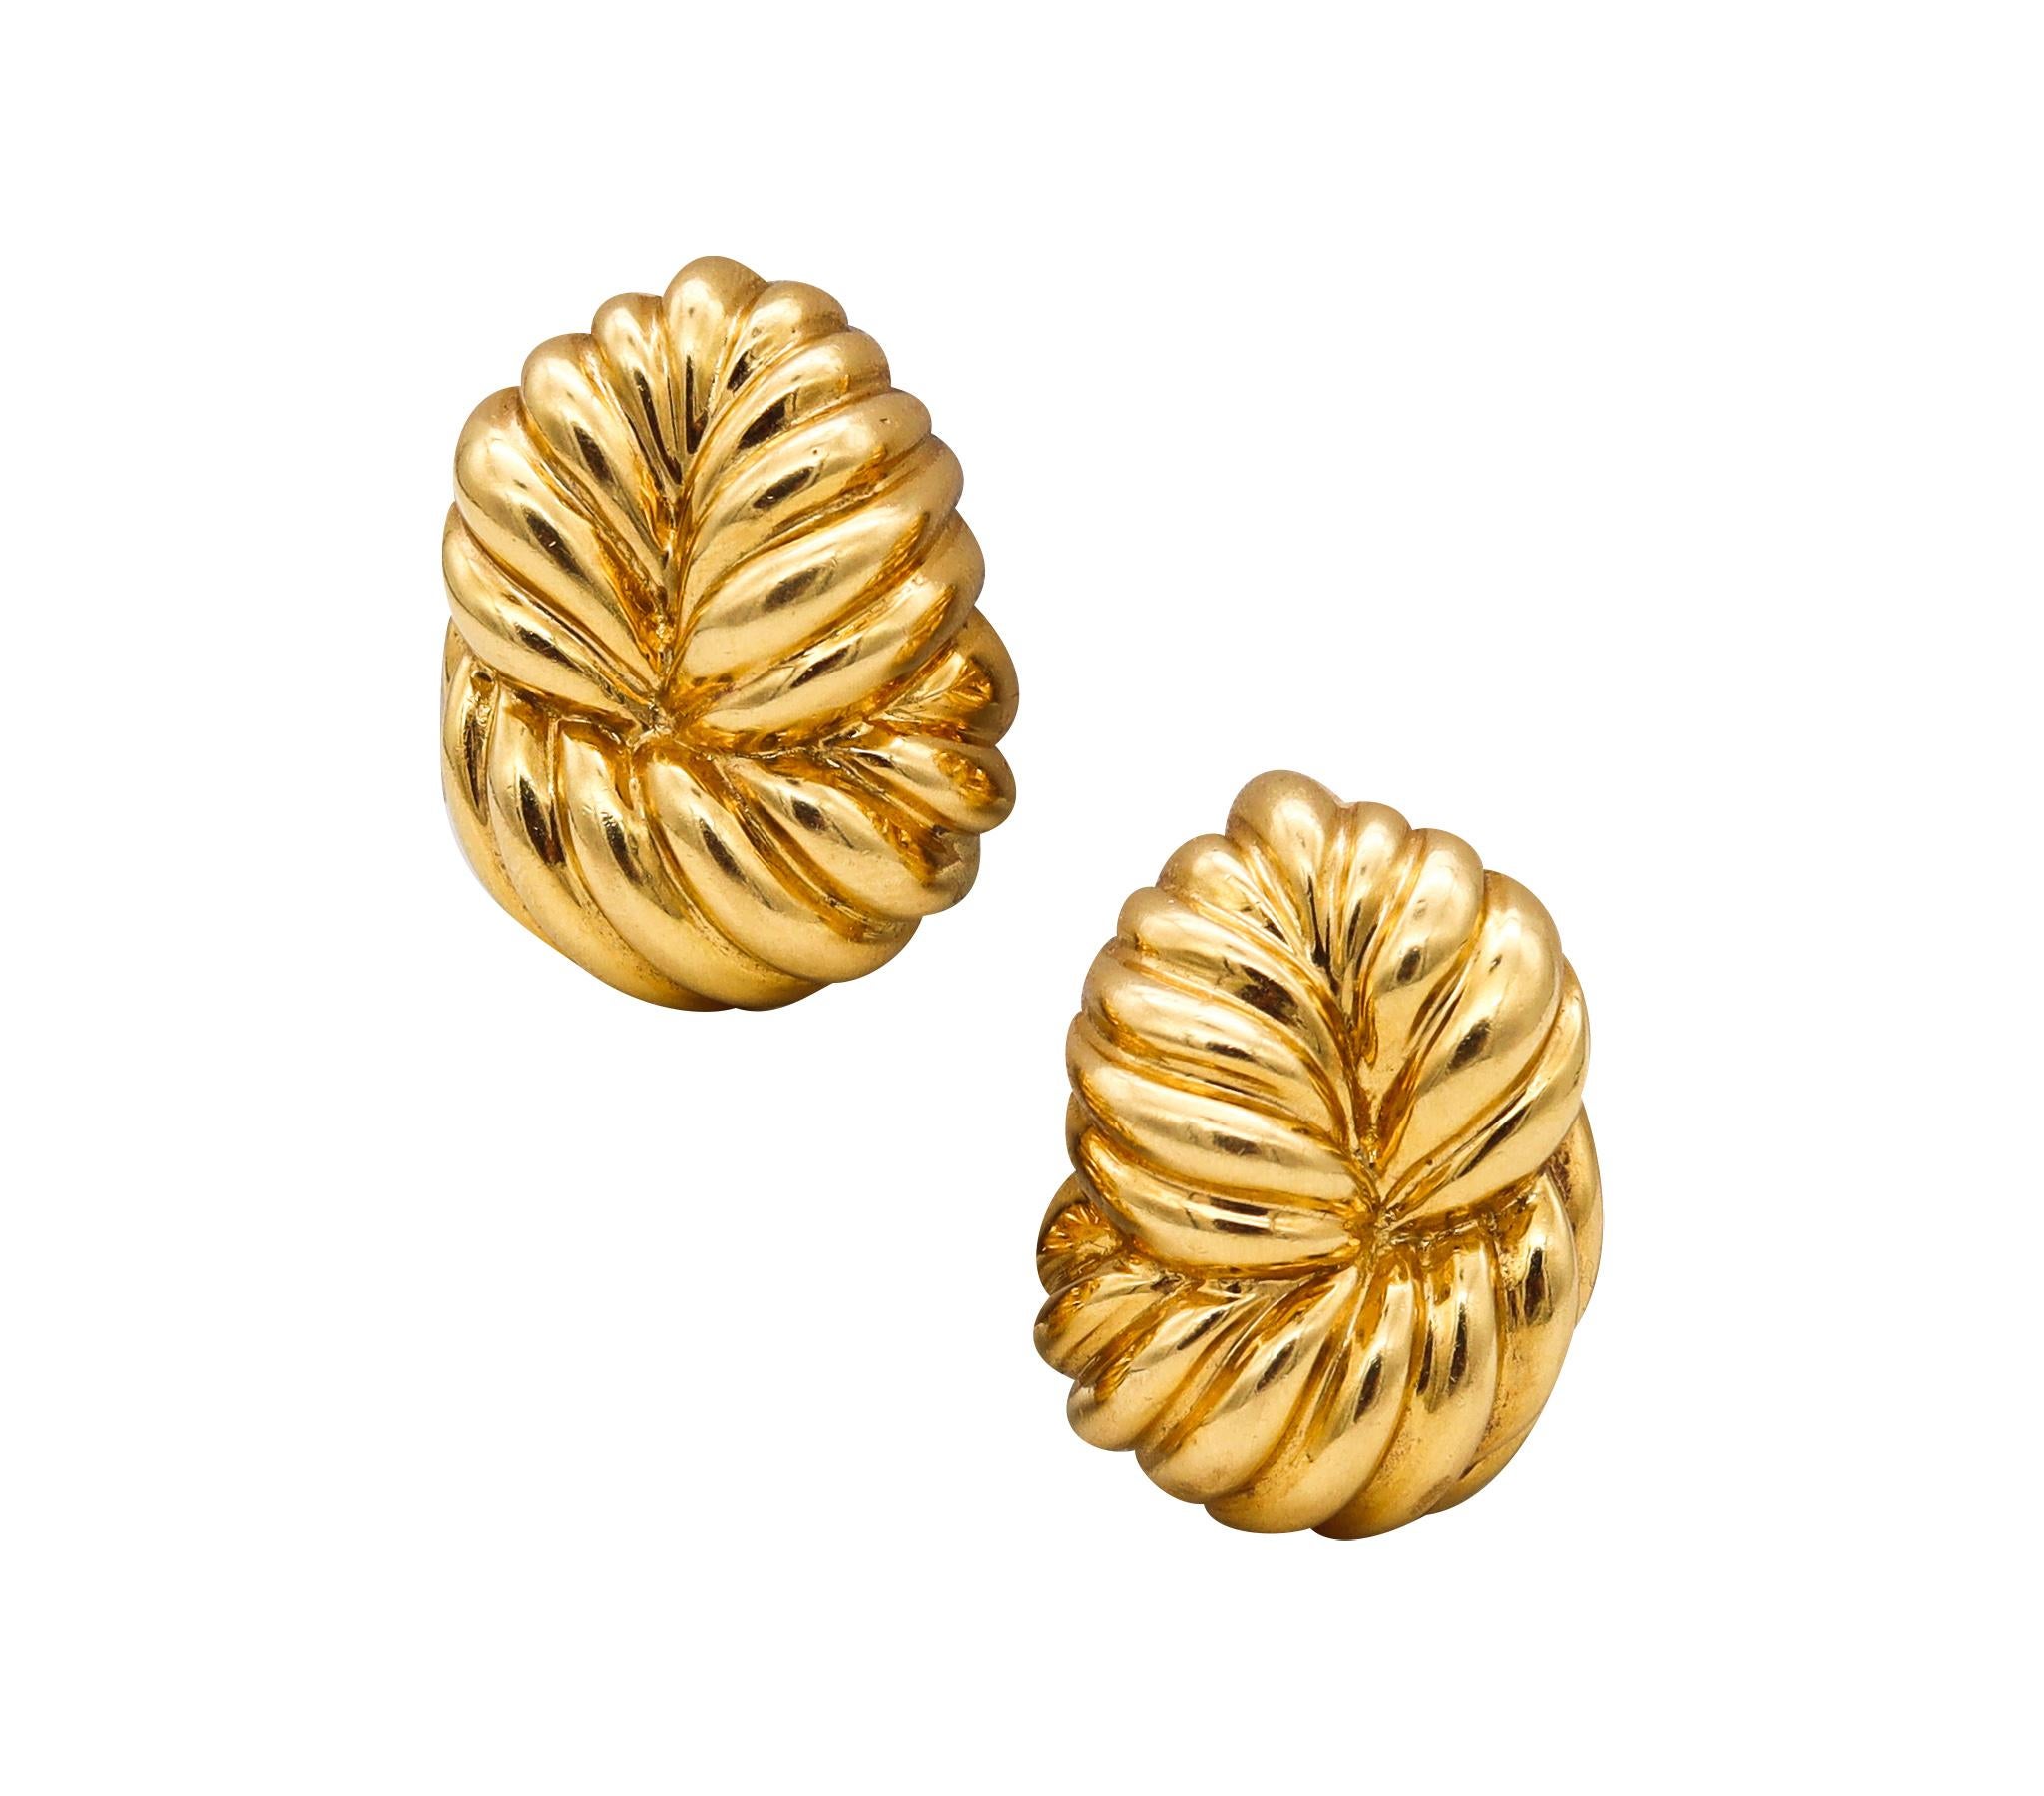 Pair of clips earrings designed by David Webb (1925-1975).

A vintage pair, made in New York city at the atelier of David Webb, back in the late 1970's. These pair of clip-on earrings was crafted with a fluted shape, in solid rich yellow gold of 18